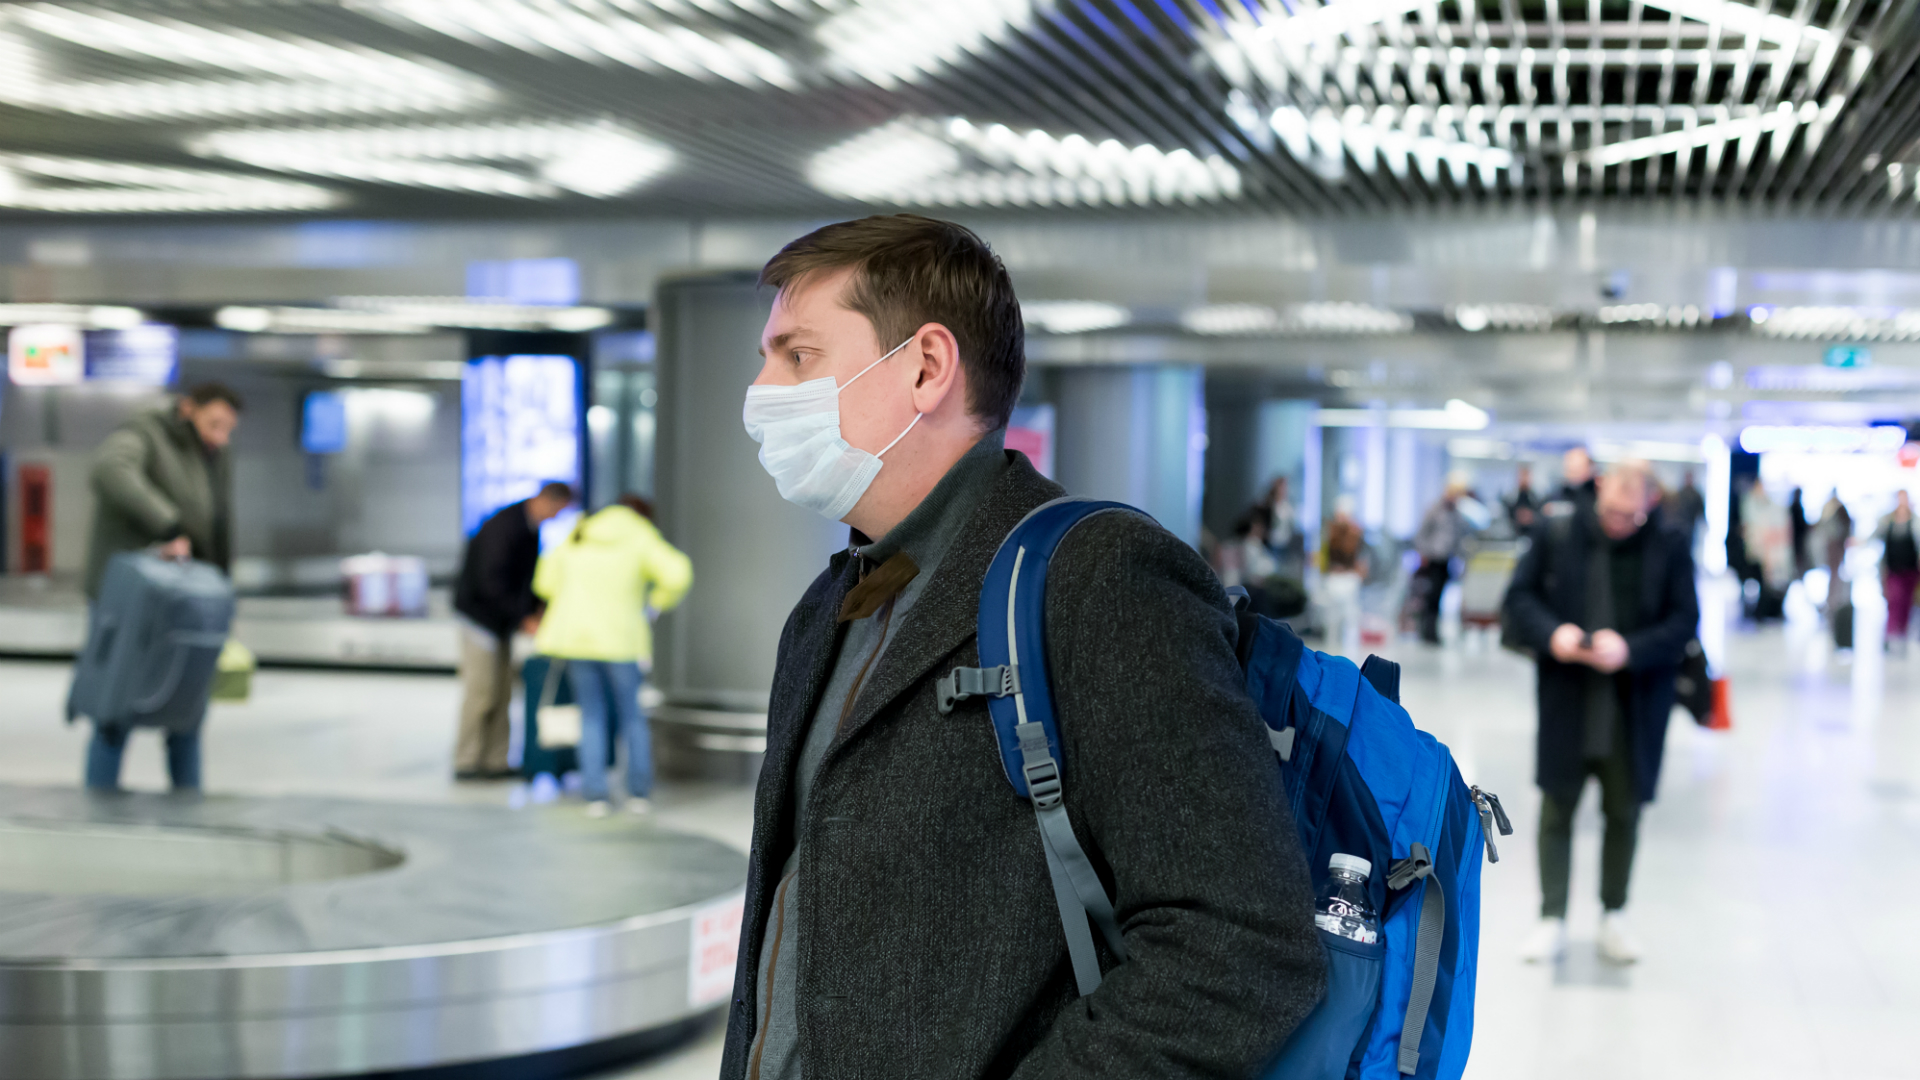 man wearing face mask in airport baggage claim